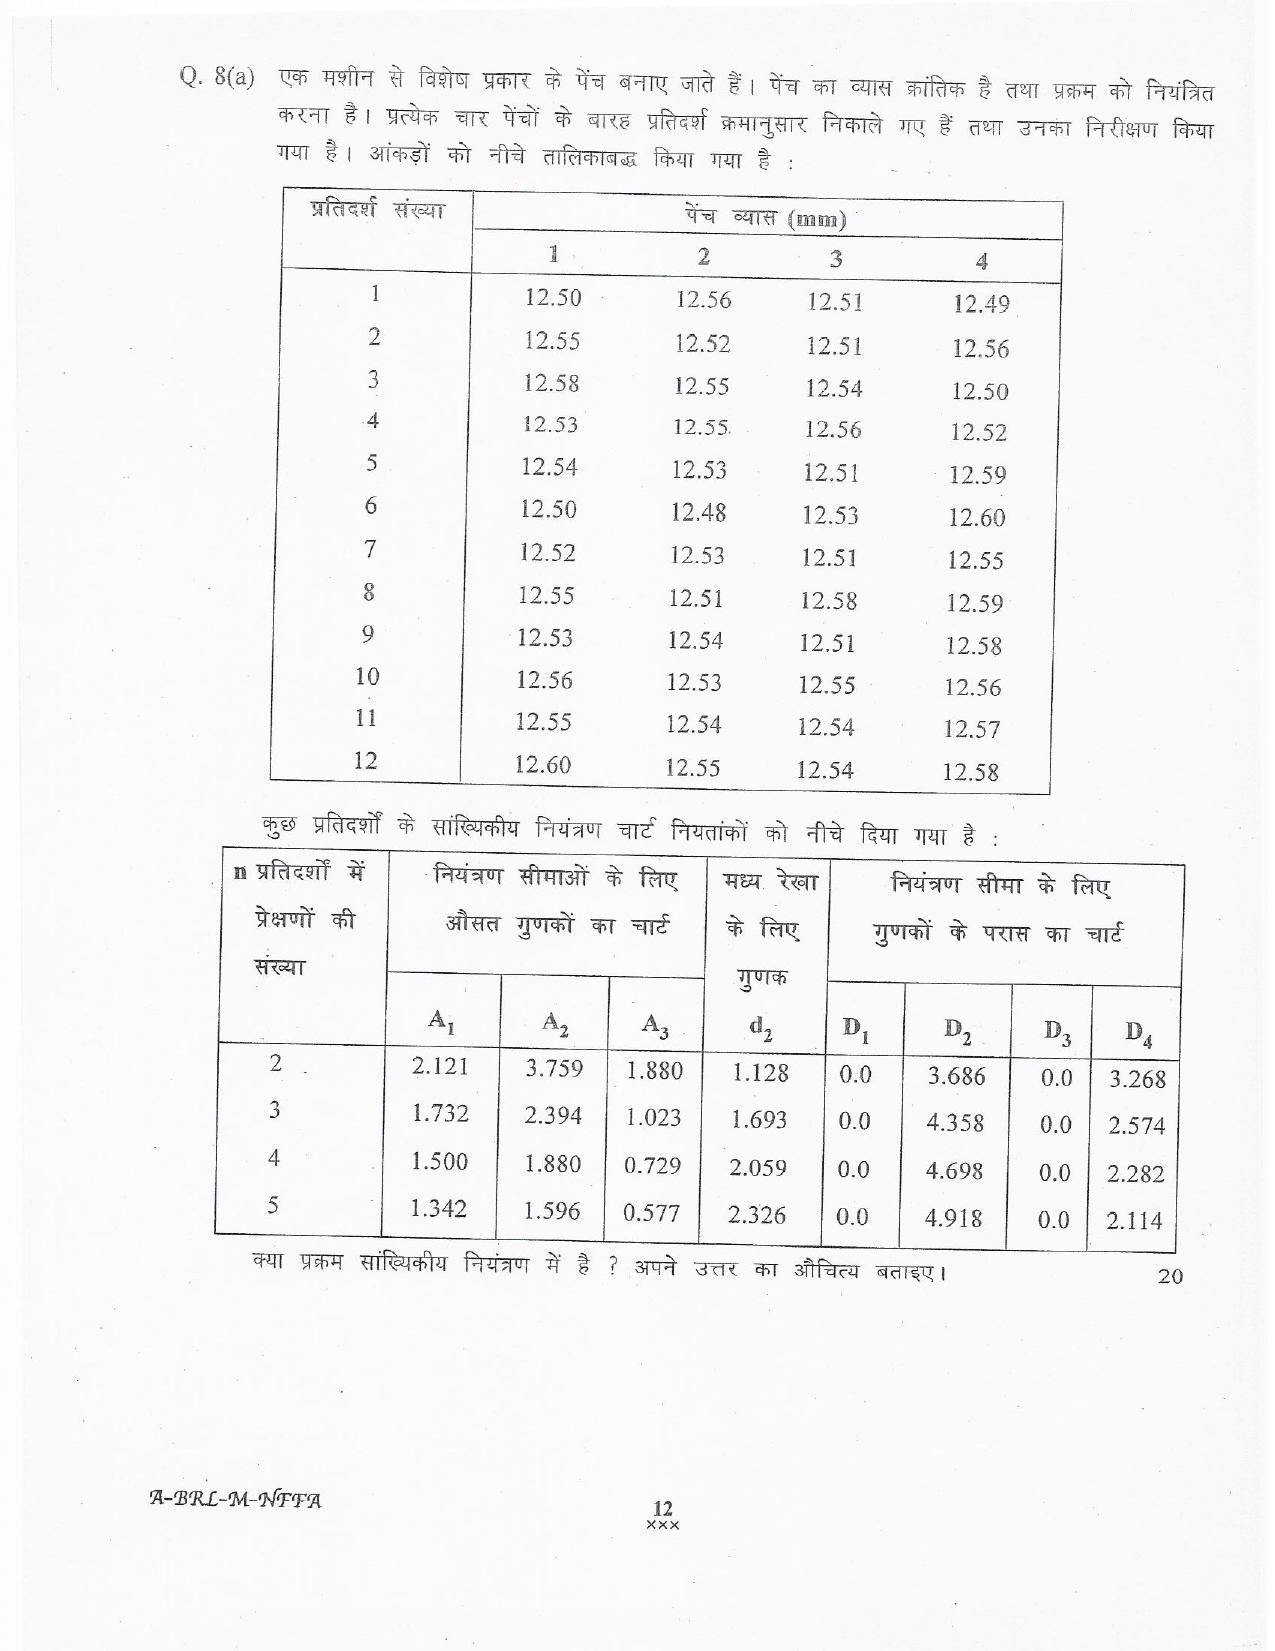 lakshadweep.gov.in Mechanical Engineering Question Papers - Page 12